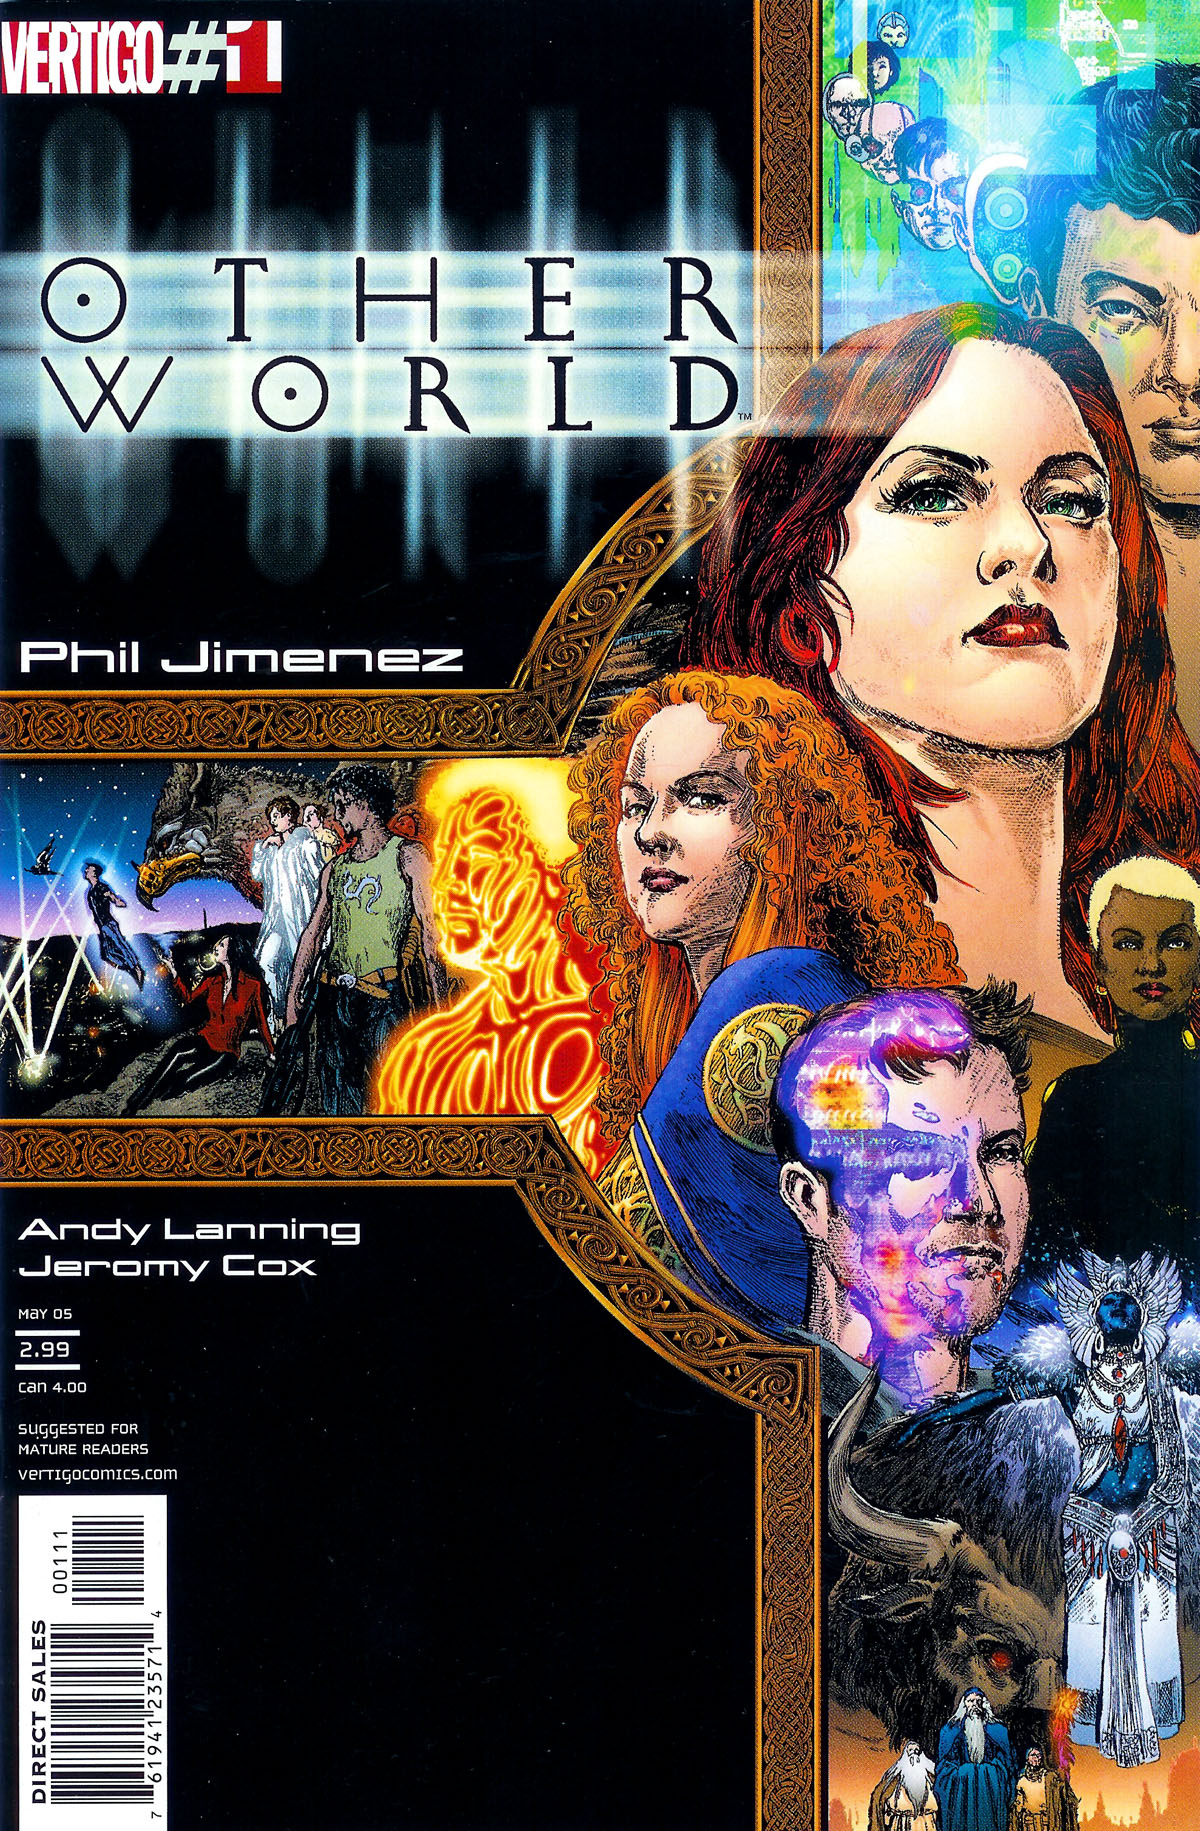 Read online Otherworld comic -  Issue #1 - 1